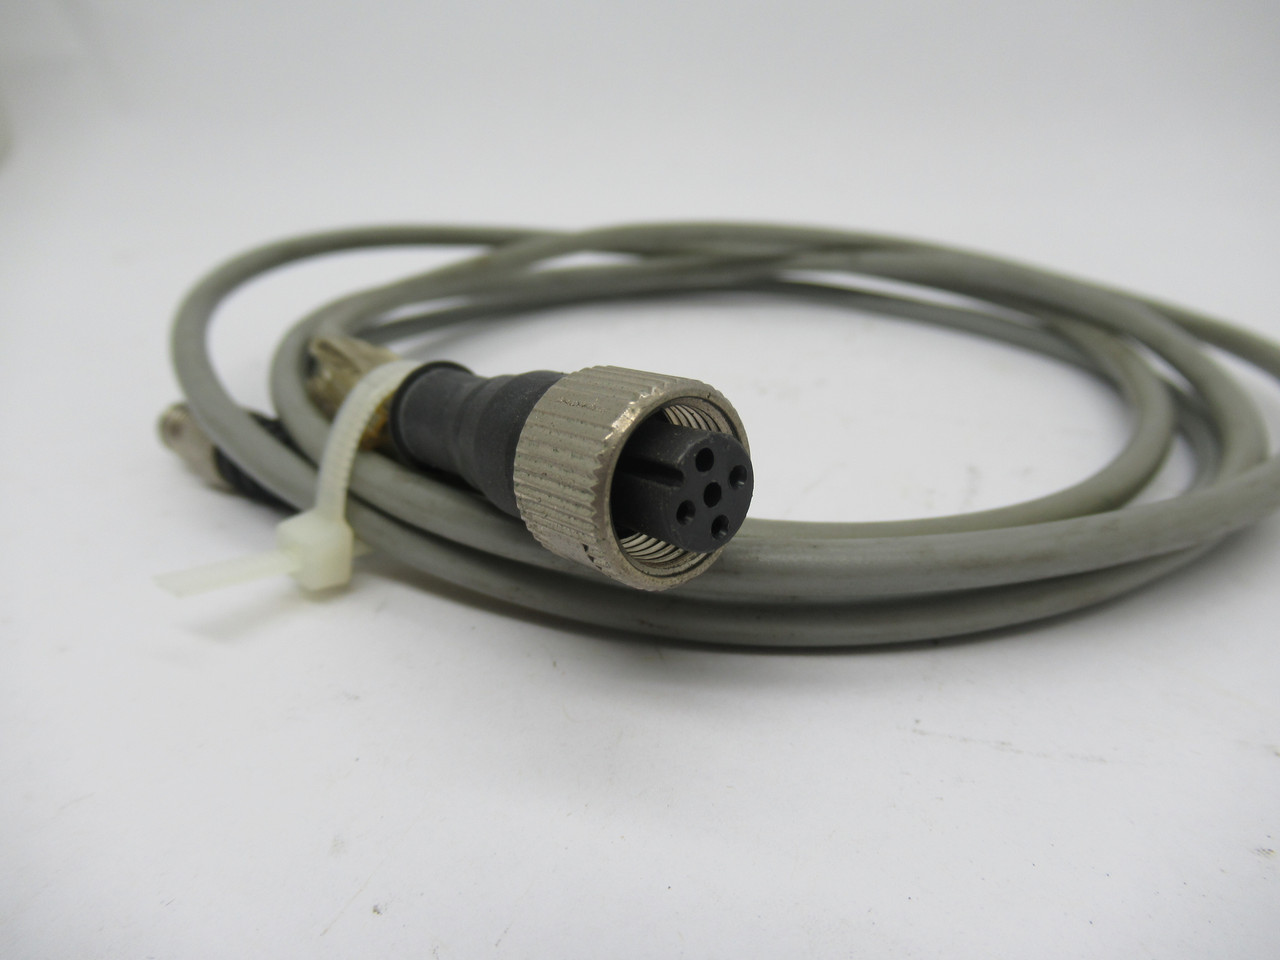 Murr Elektronik MSBL0-H-RJB1.5 Round Plug Connector 3P Male W/ 1.5m Cable USED